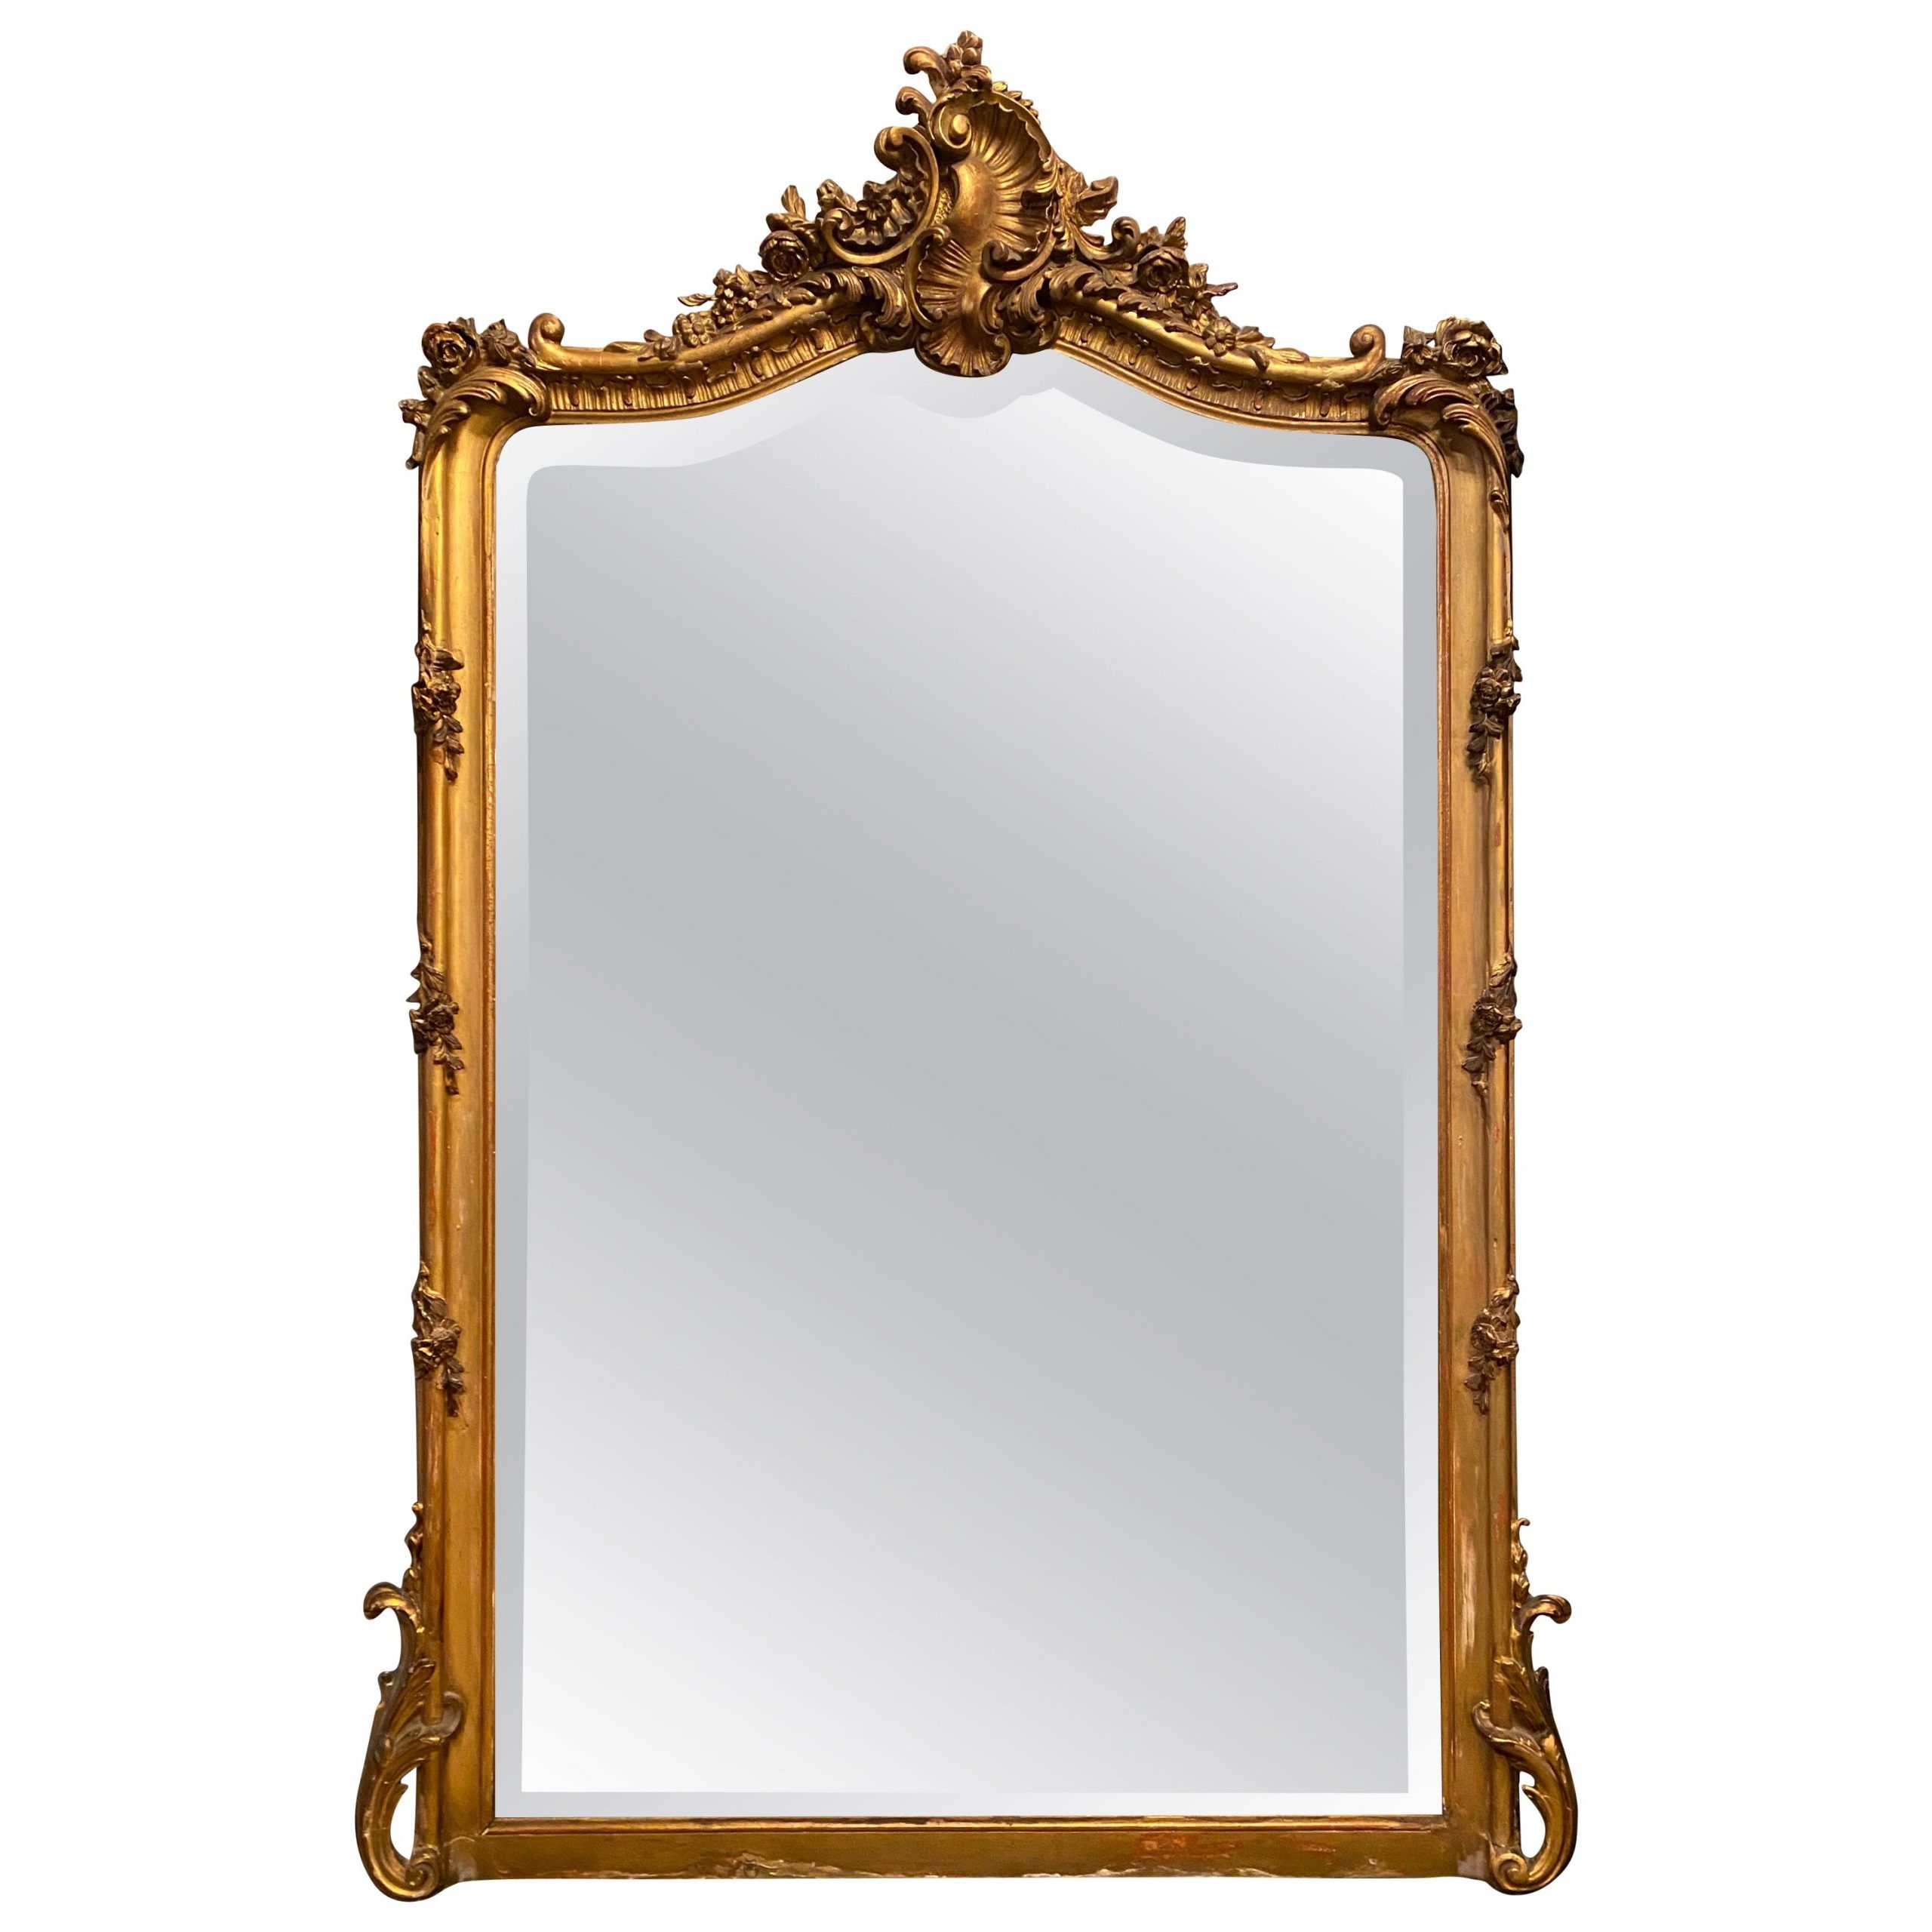 Antique French Gold Leaf Beveled Mirror, Circa 1855 1865 At 1stdibs Pertaining To Antique Gold Leaf Round Oversized Wall Mirrors (View 10 of 15)